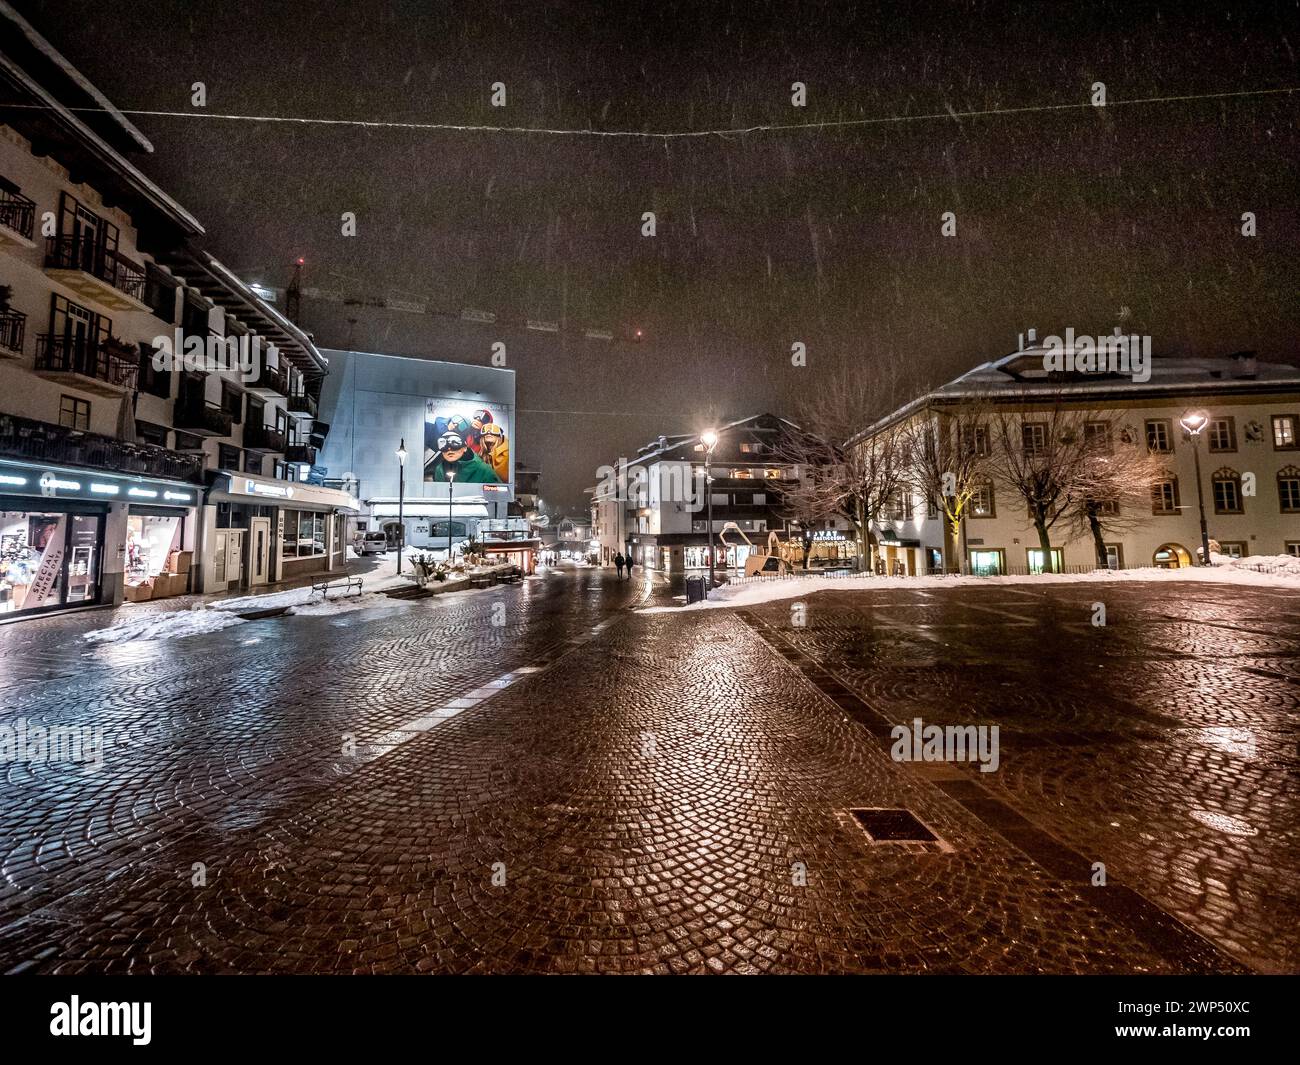 The image is of a winter night-time street scene in the resort town of Cortina d'Ampezzo located in the famous mountains of the Italian Dolomites Stock Photo